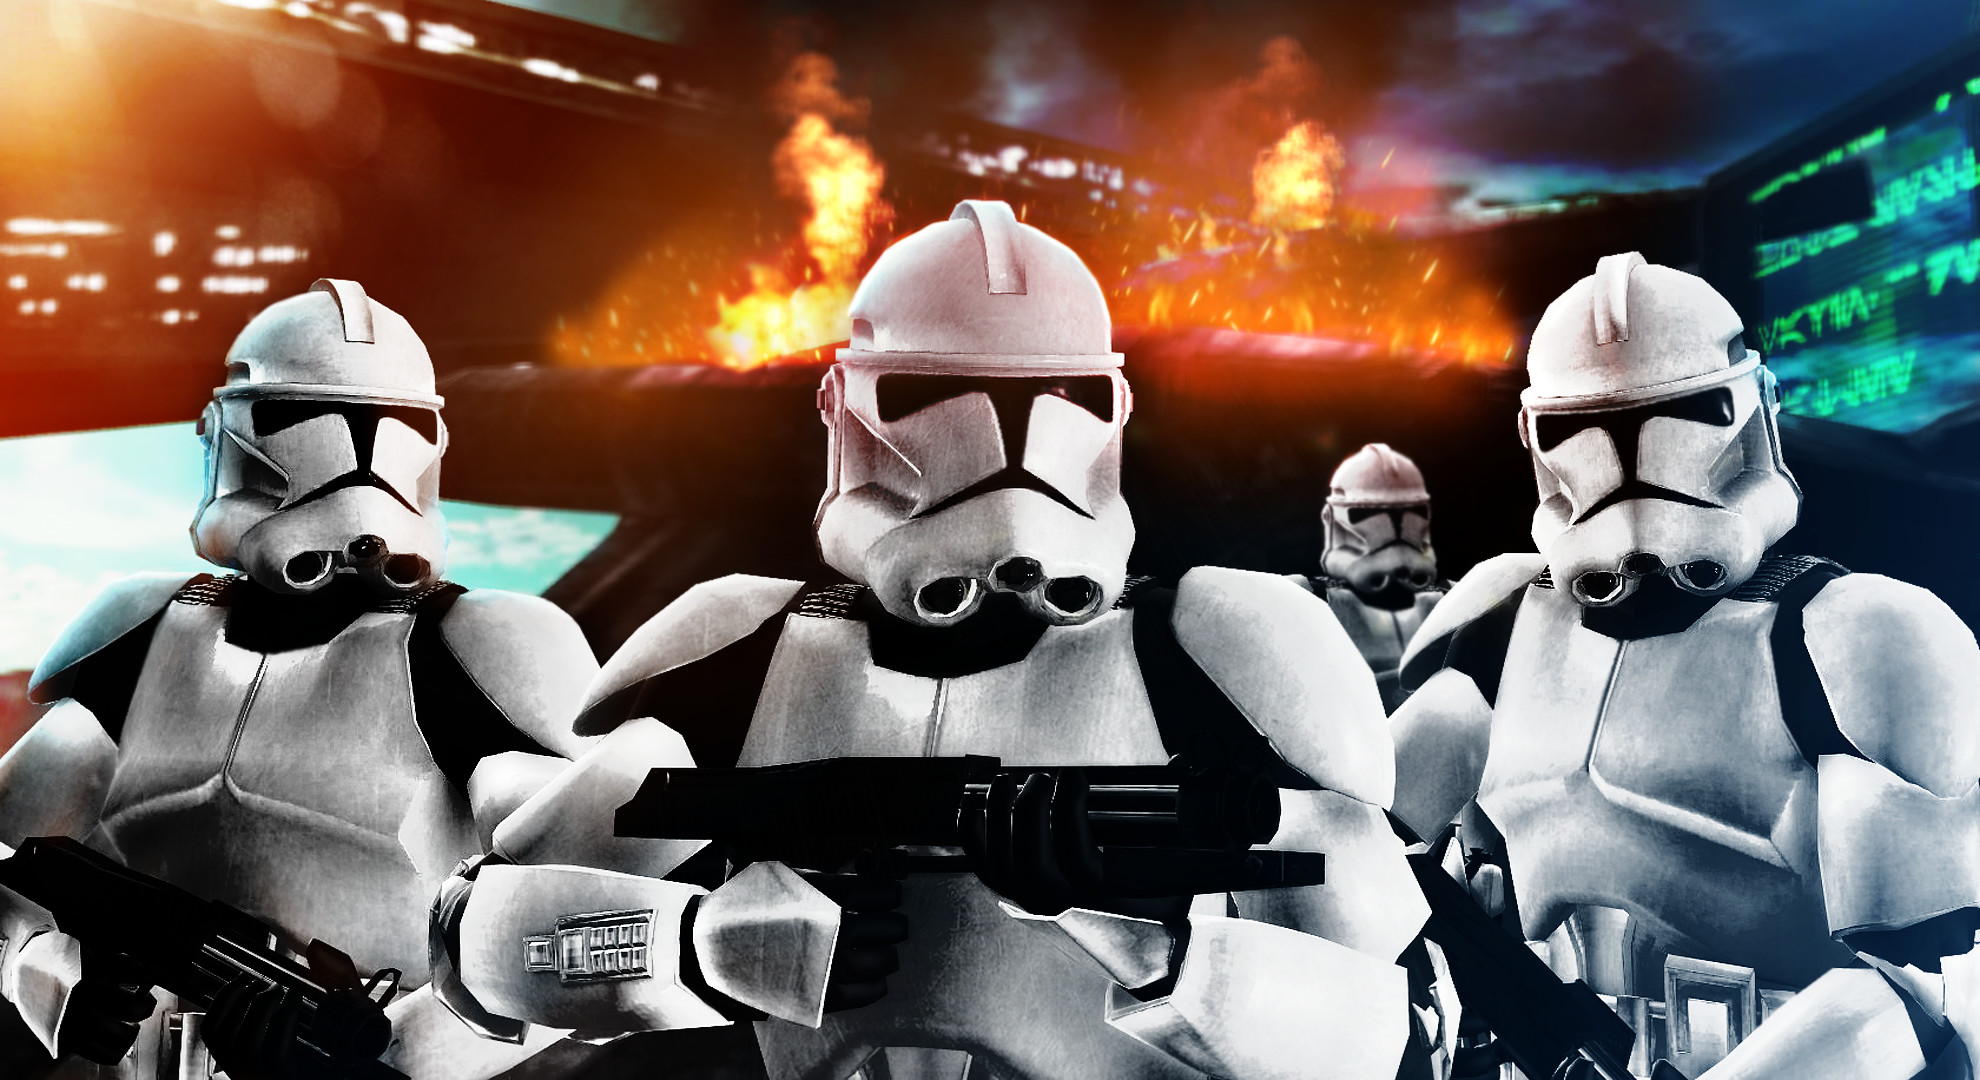 Clone Troopers by Lord